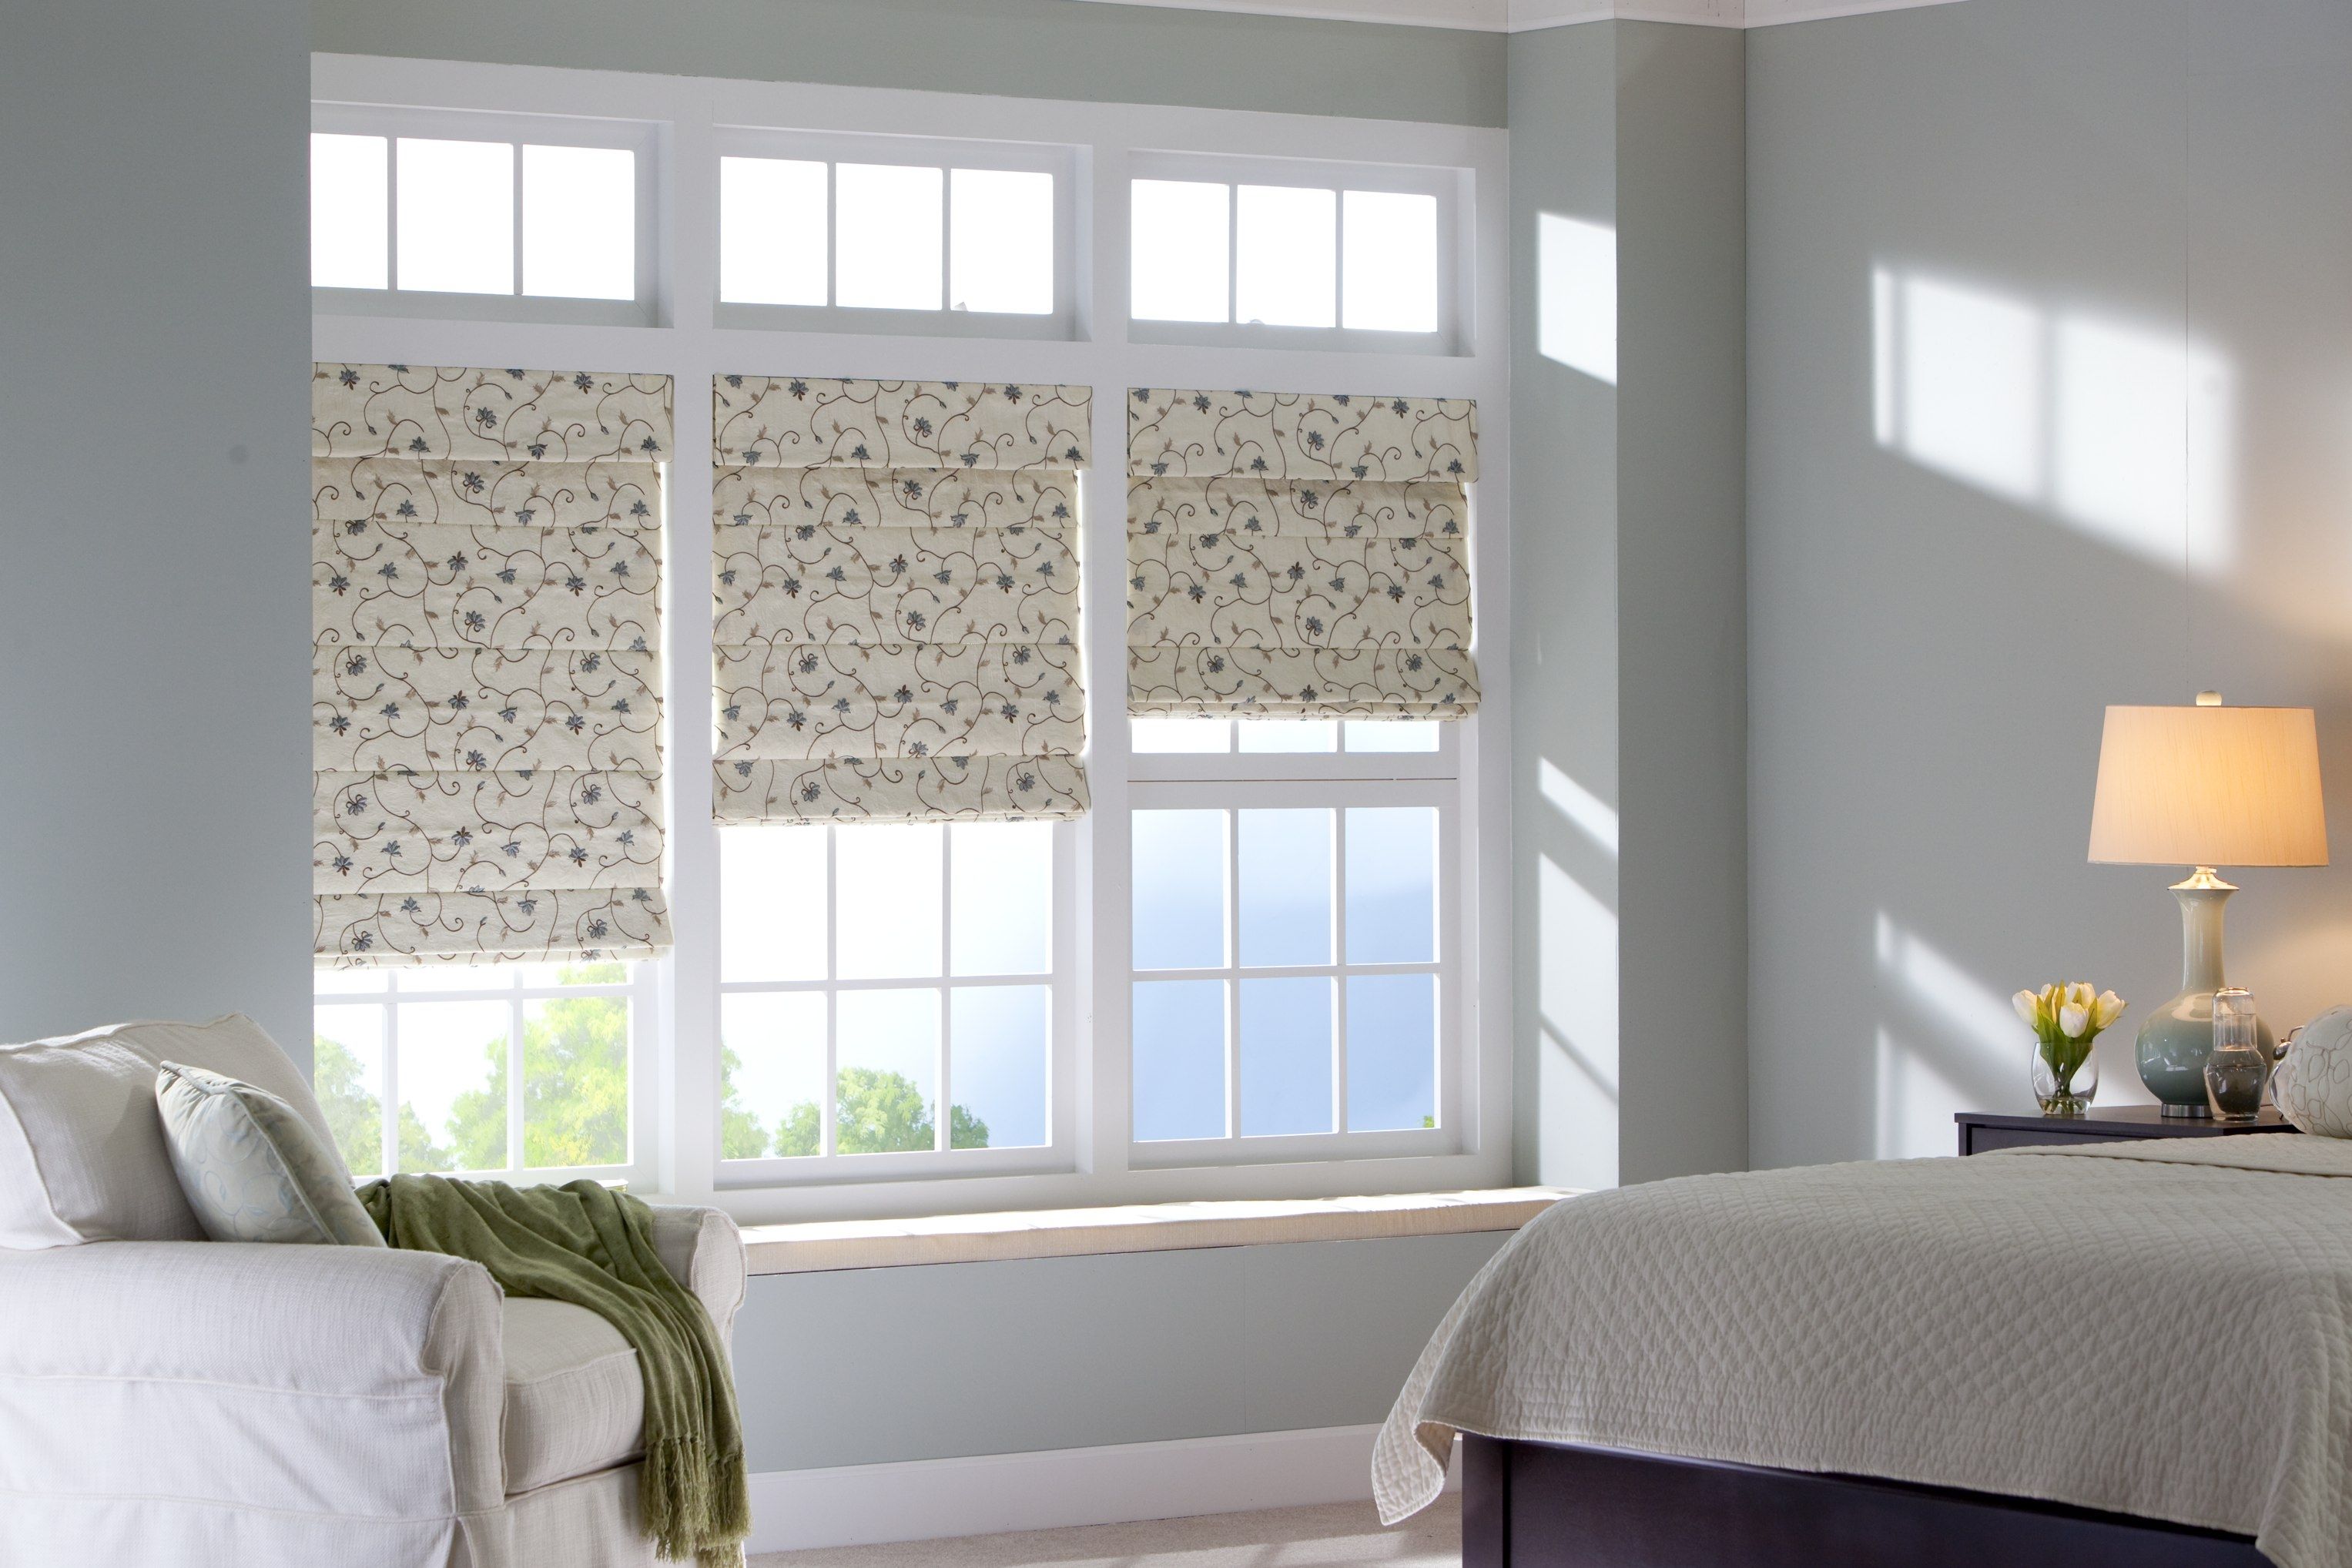 Concept Blinds Design Custom Fabric Roman Shade Pertaining To Roman Fabric Blinds (View 2 of 15)